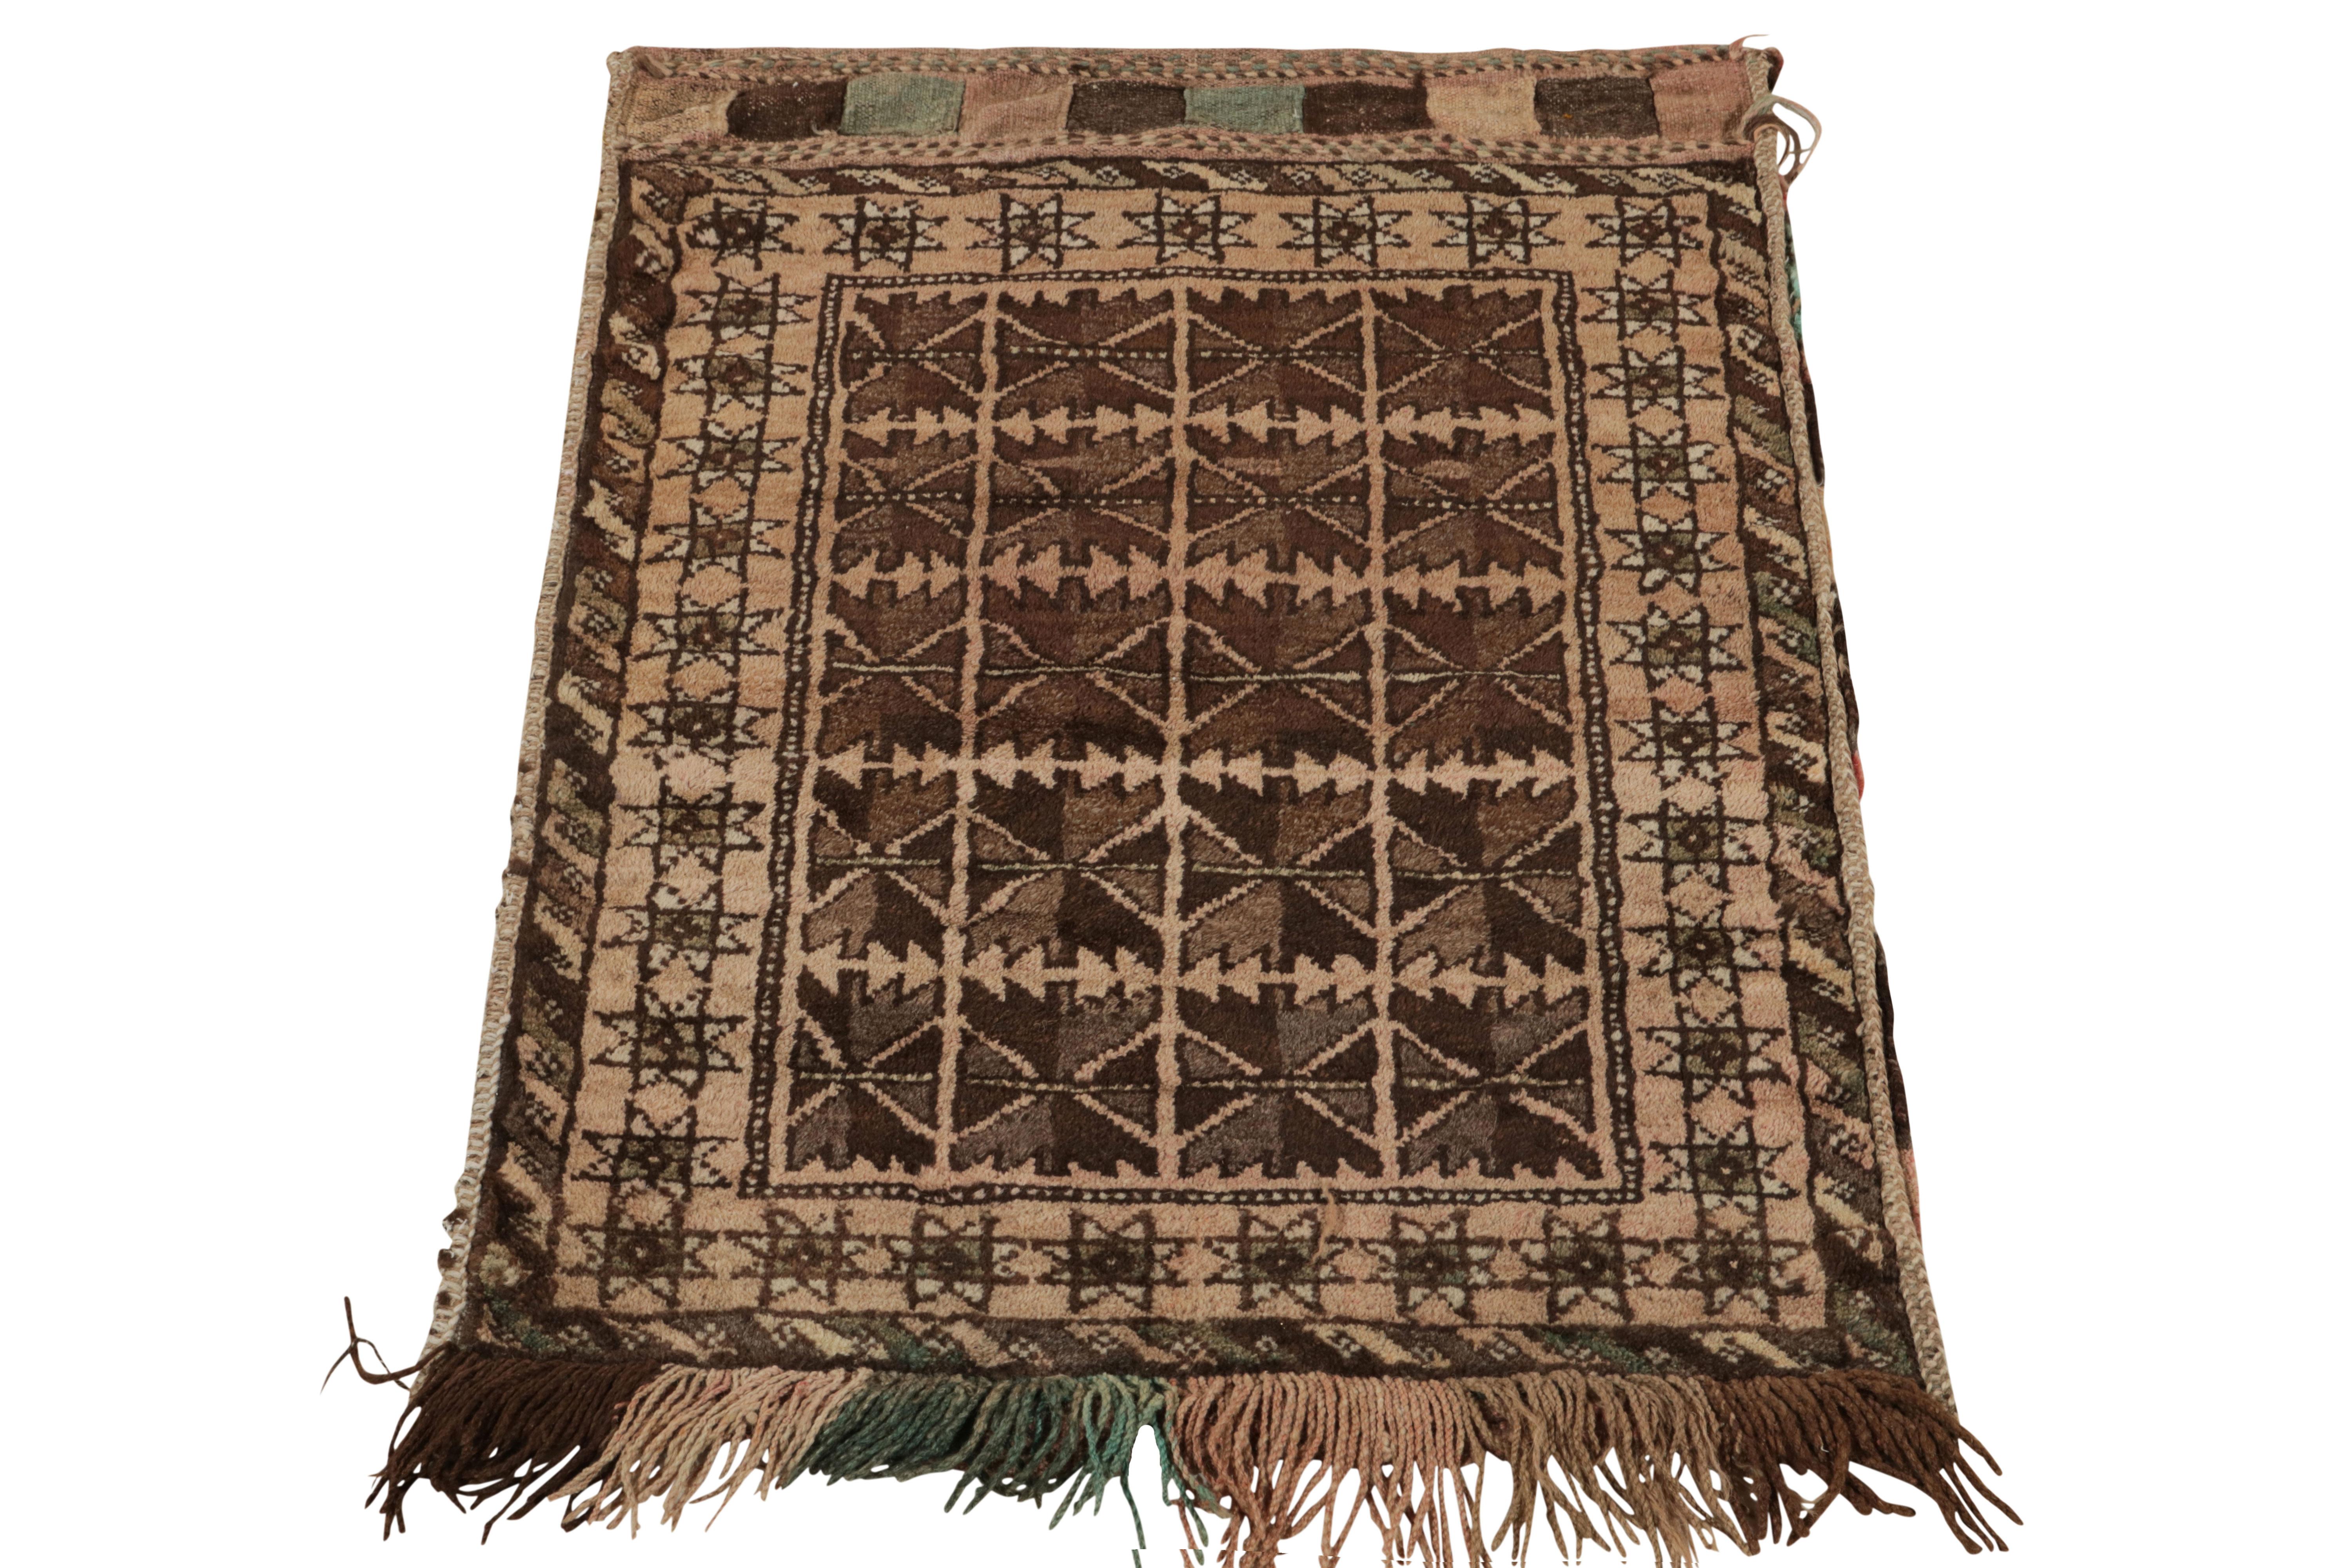 Paying tribute to the nomadic sensibilities of Baluchistan, a 2x3 antique Baluch rug coming from Persia circa 1920-1930. The hand-knotted wool rug displays a tribal geometric pattern in brown-beige for exceptional pagination on scale. The fine